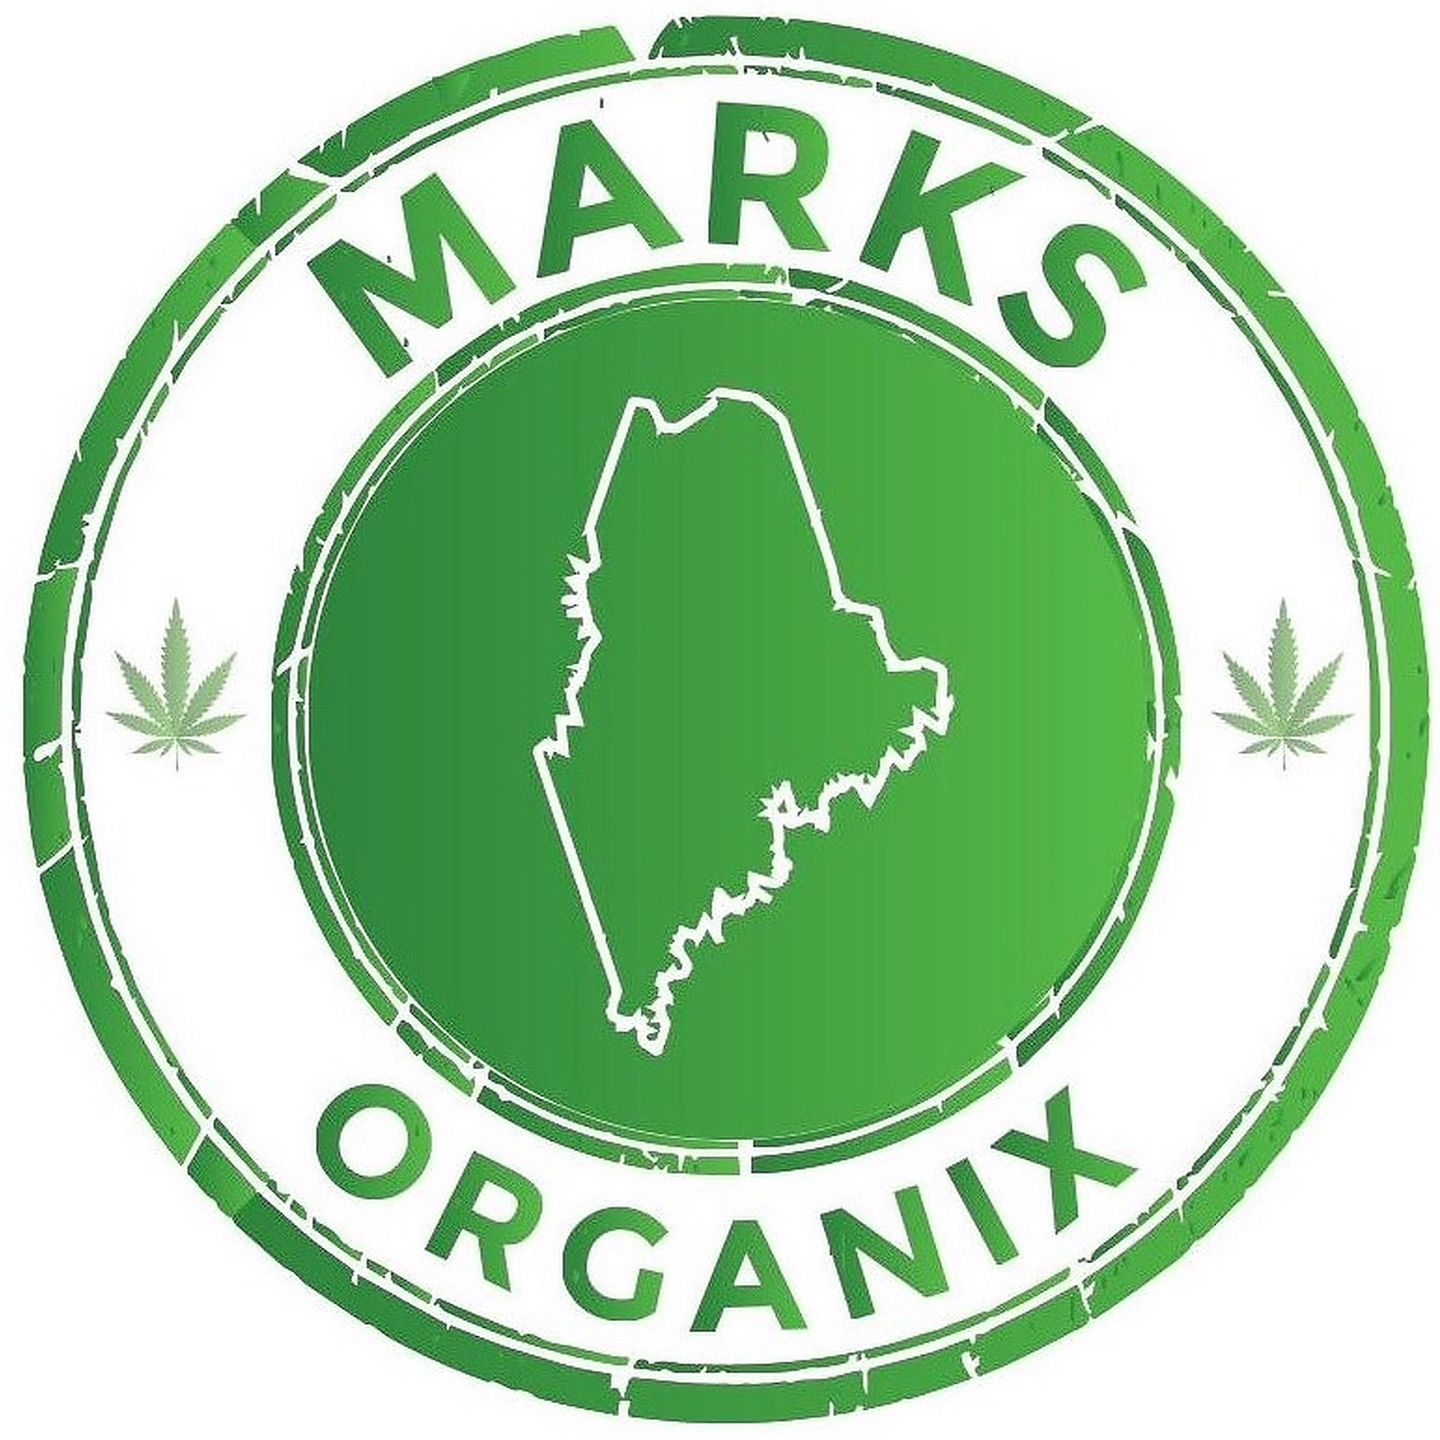 image feature Marks Organix